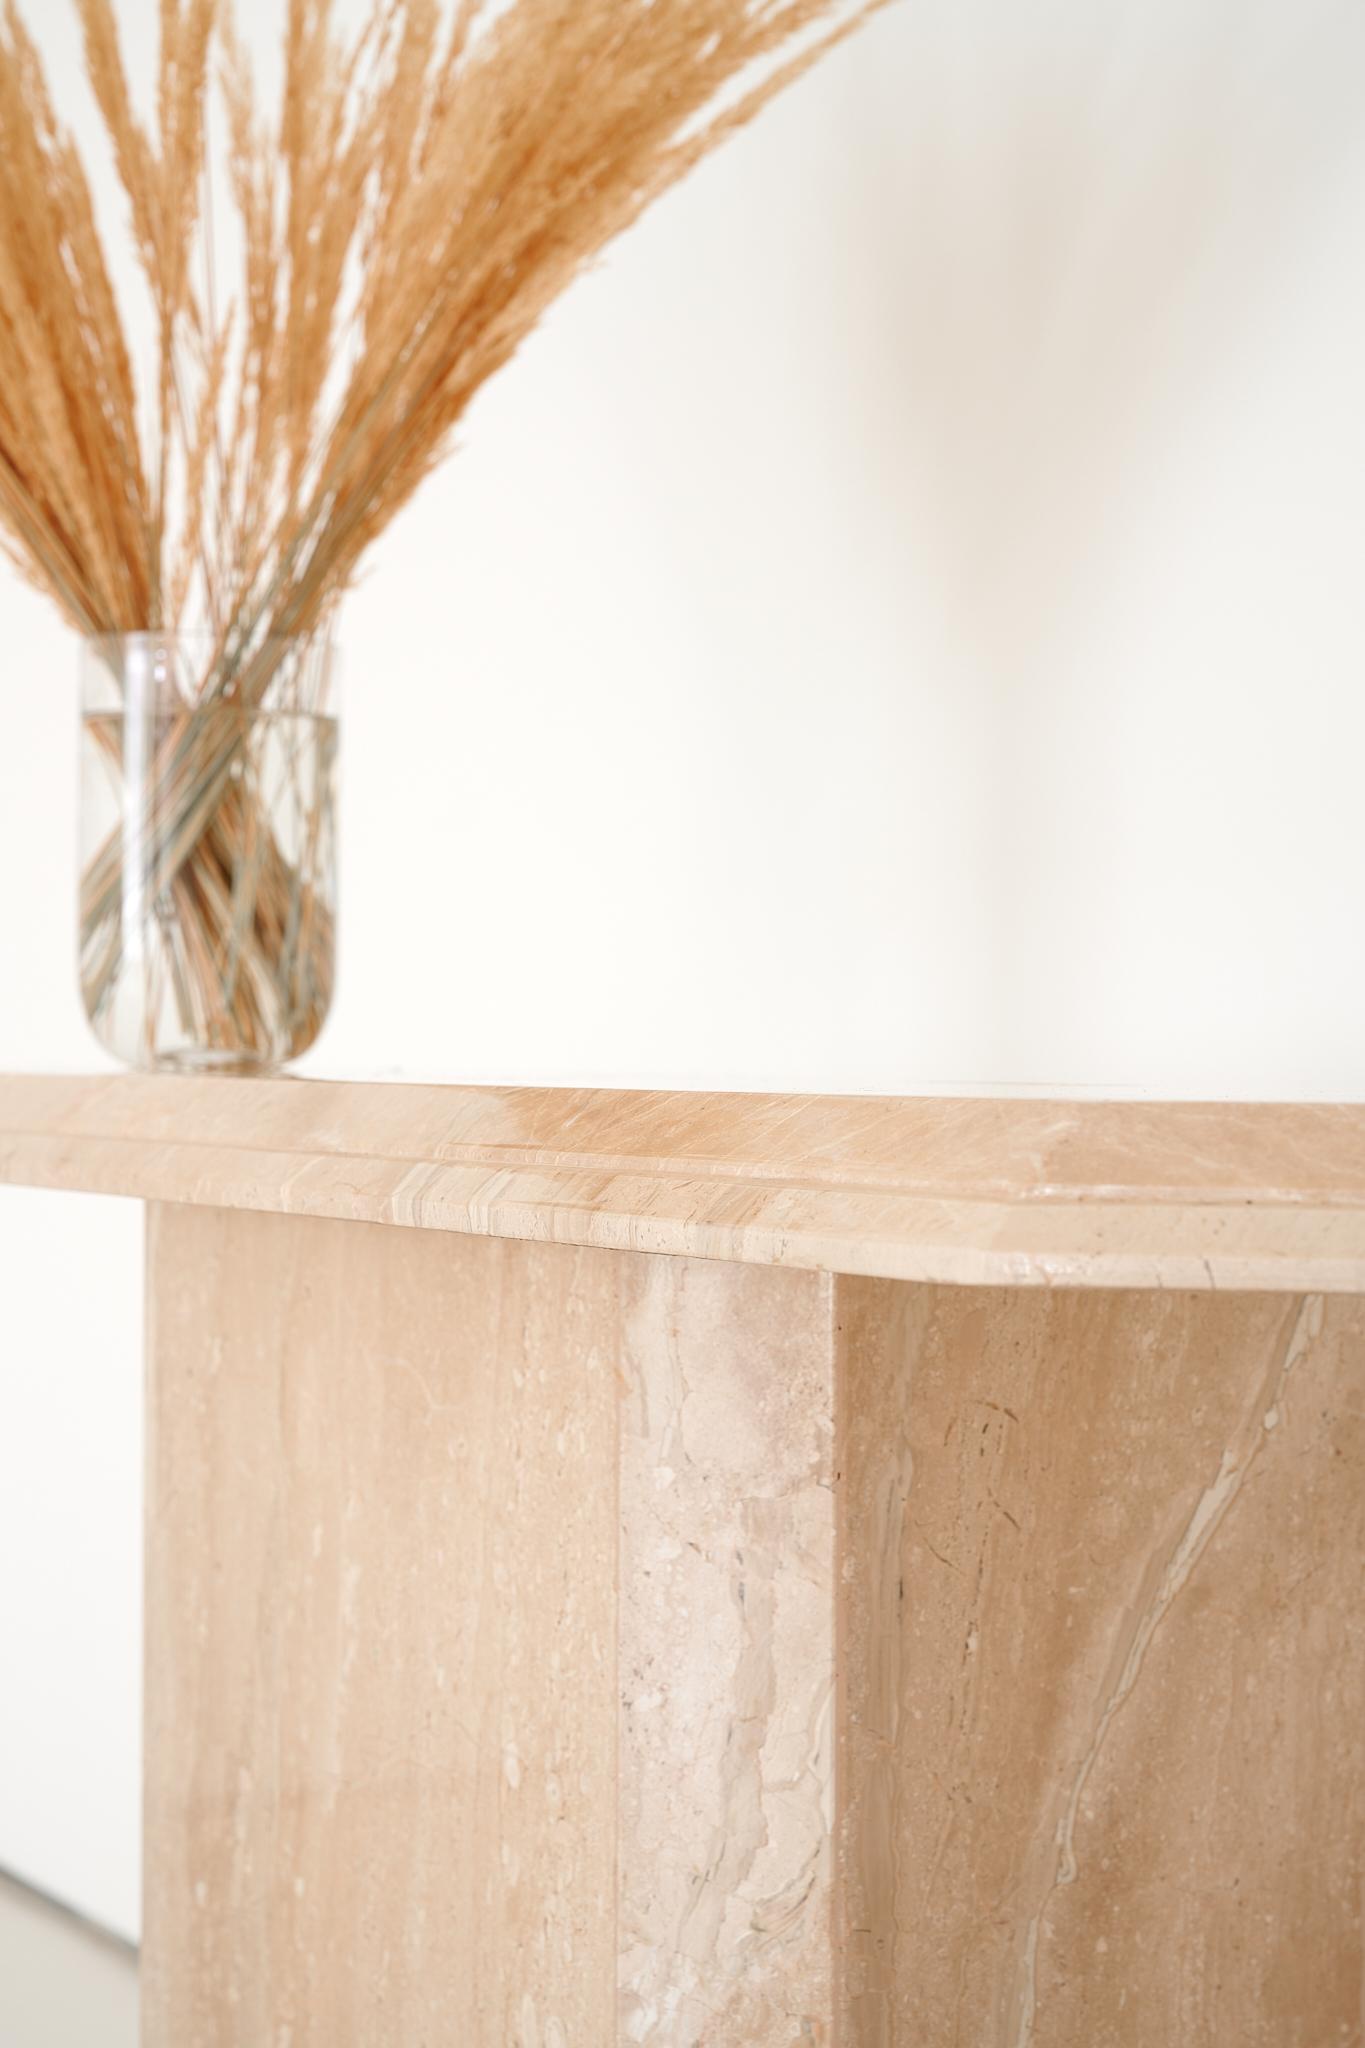 beige marble console table